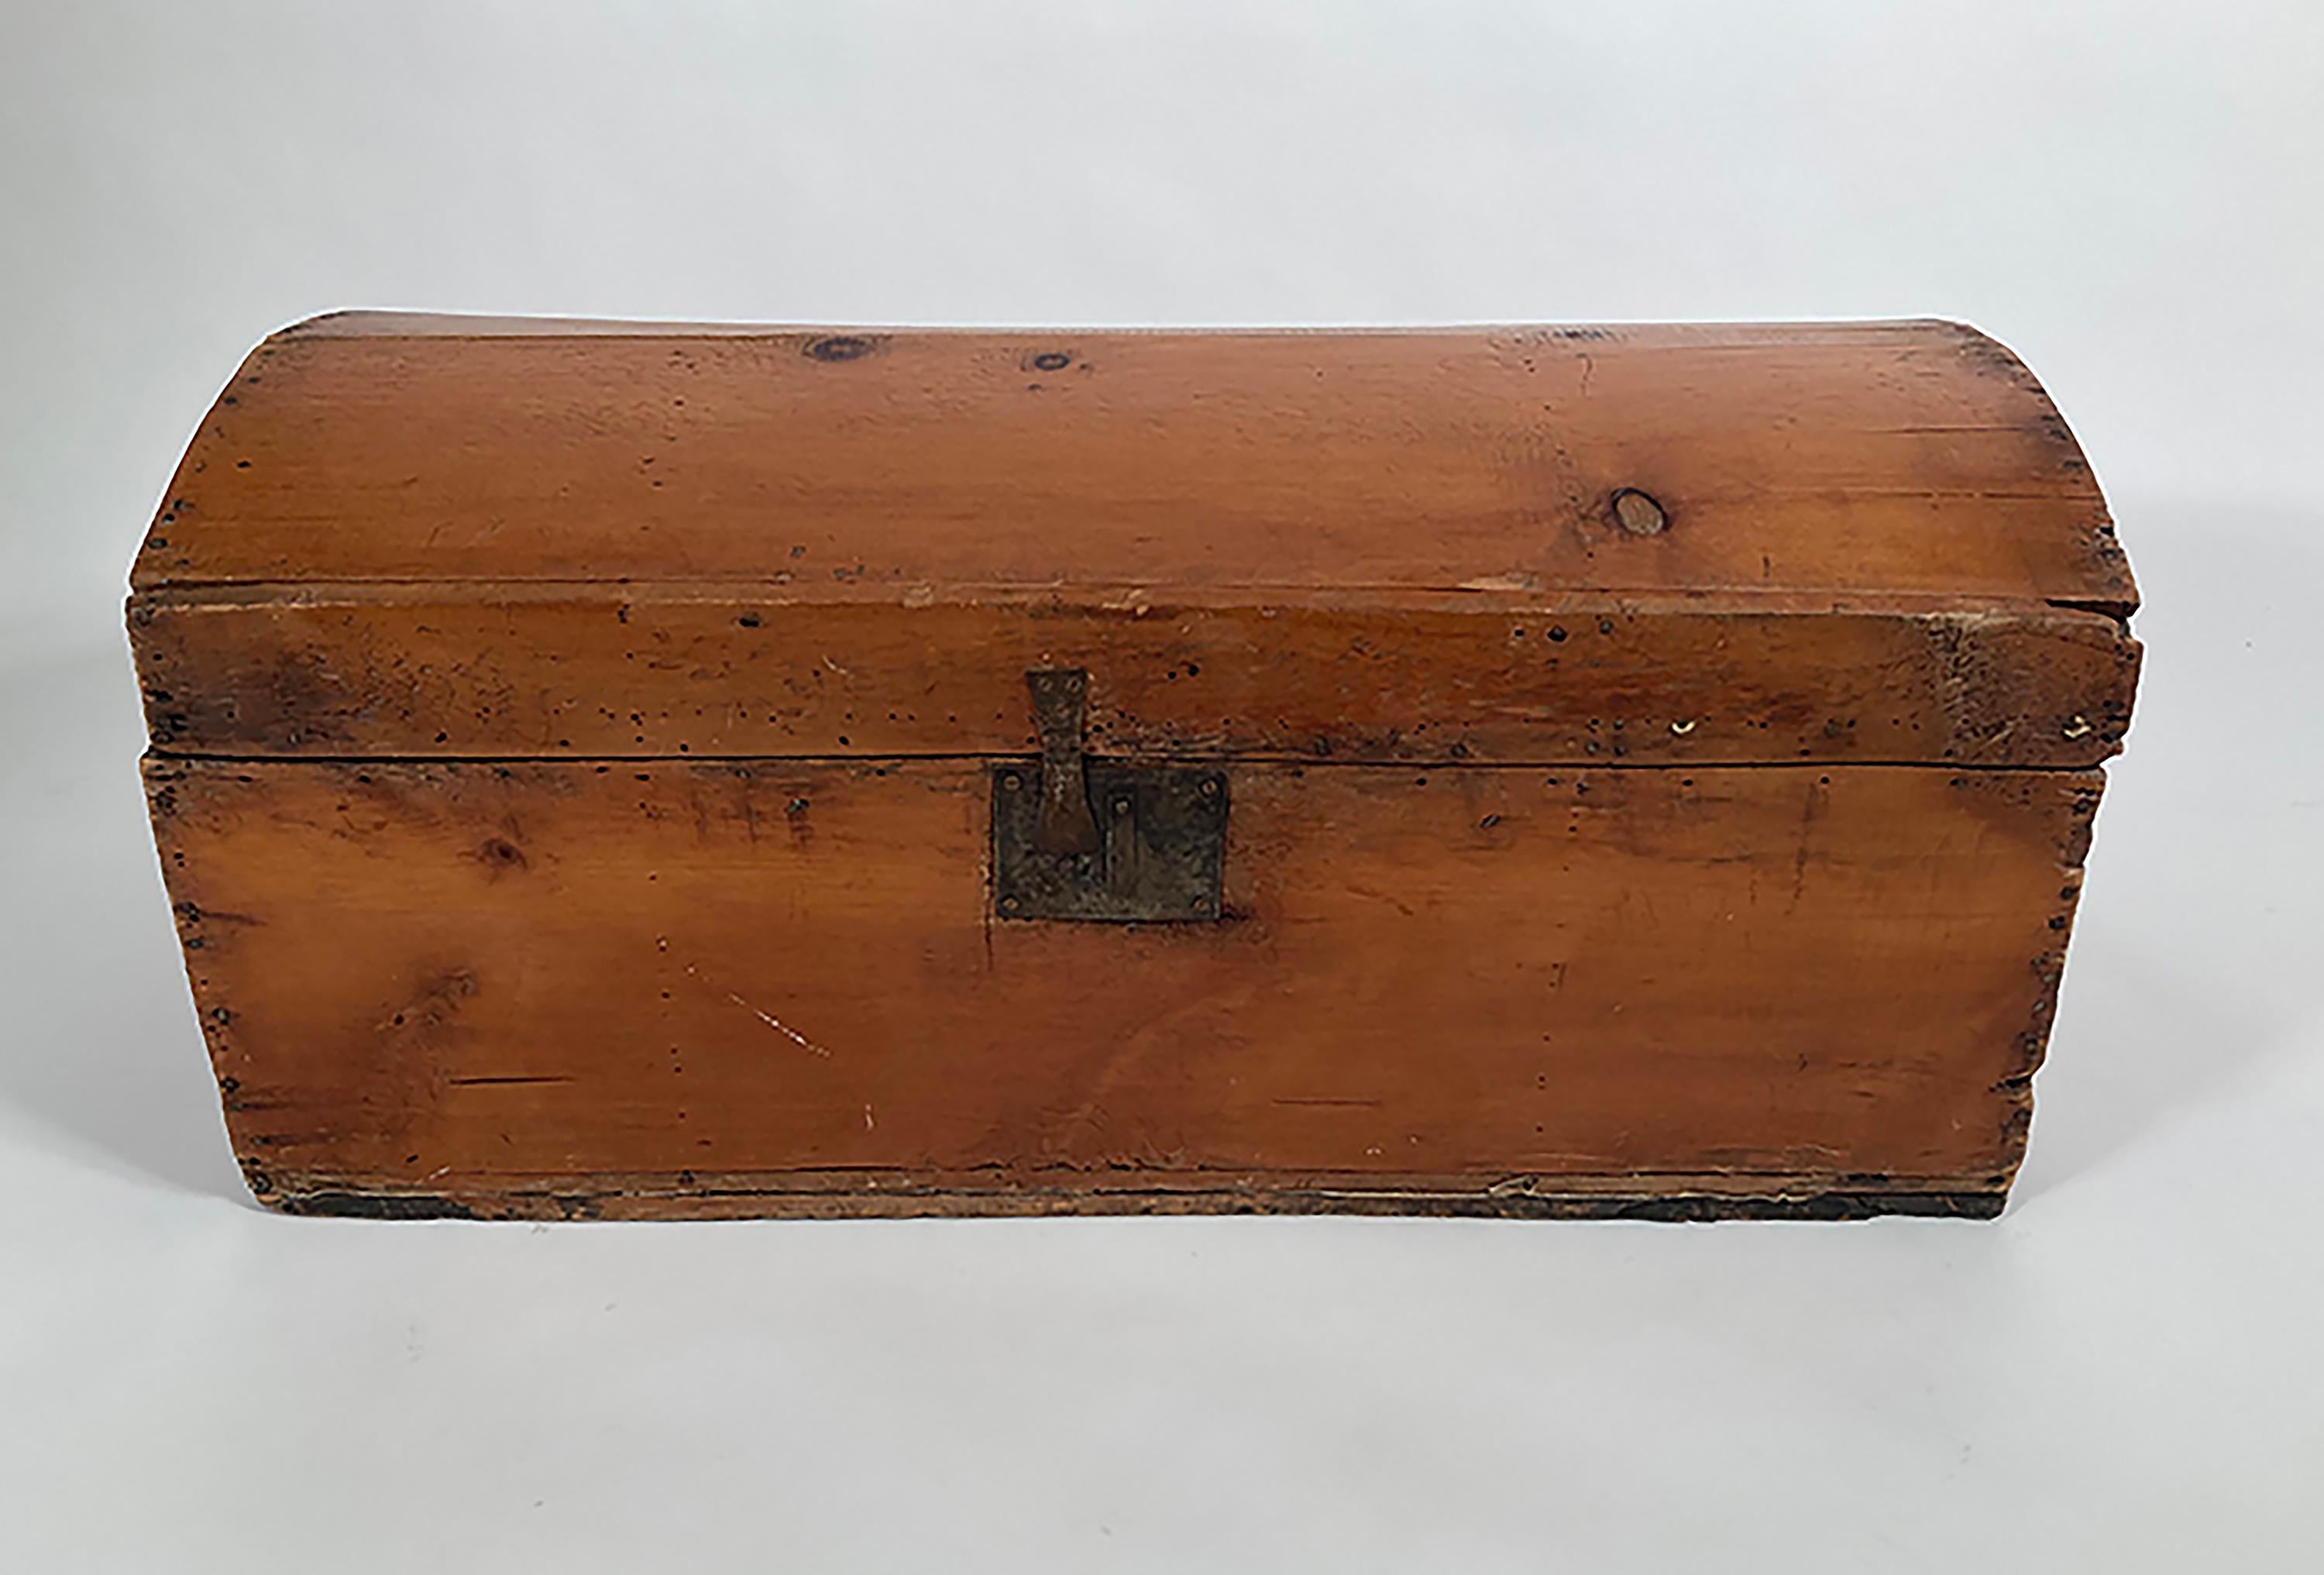 If this trunk could speak, it would tell a story of its many journeys from Frankfort, Kentucky to many parts of the country, beginning in the mid to late 1700’s. It would tell tales about its owners Jephthah and Peter Dudley, two well-known